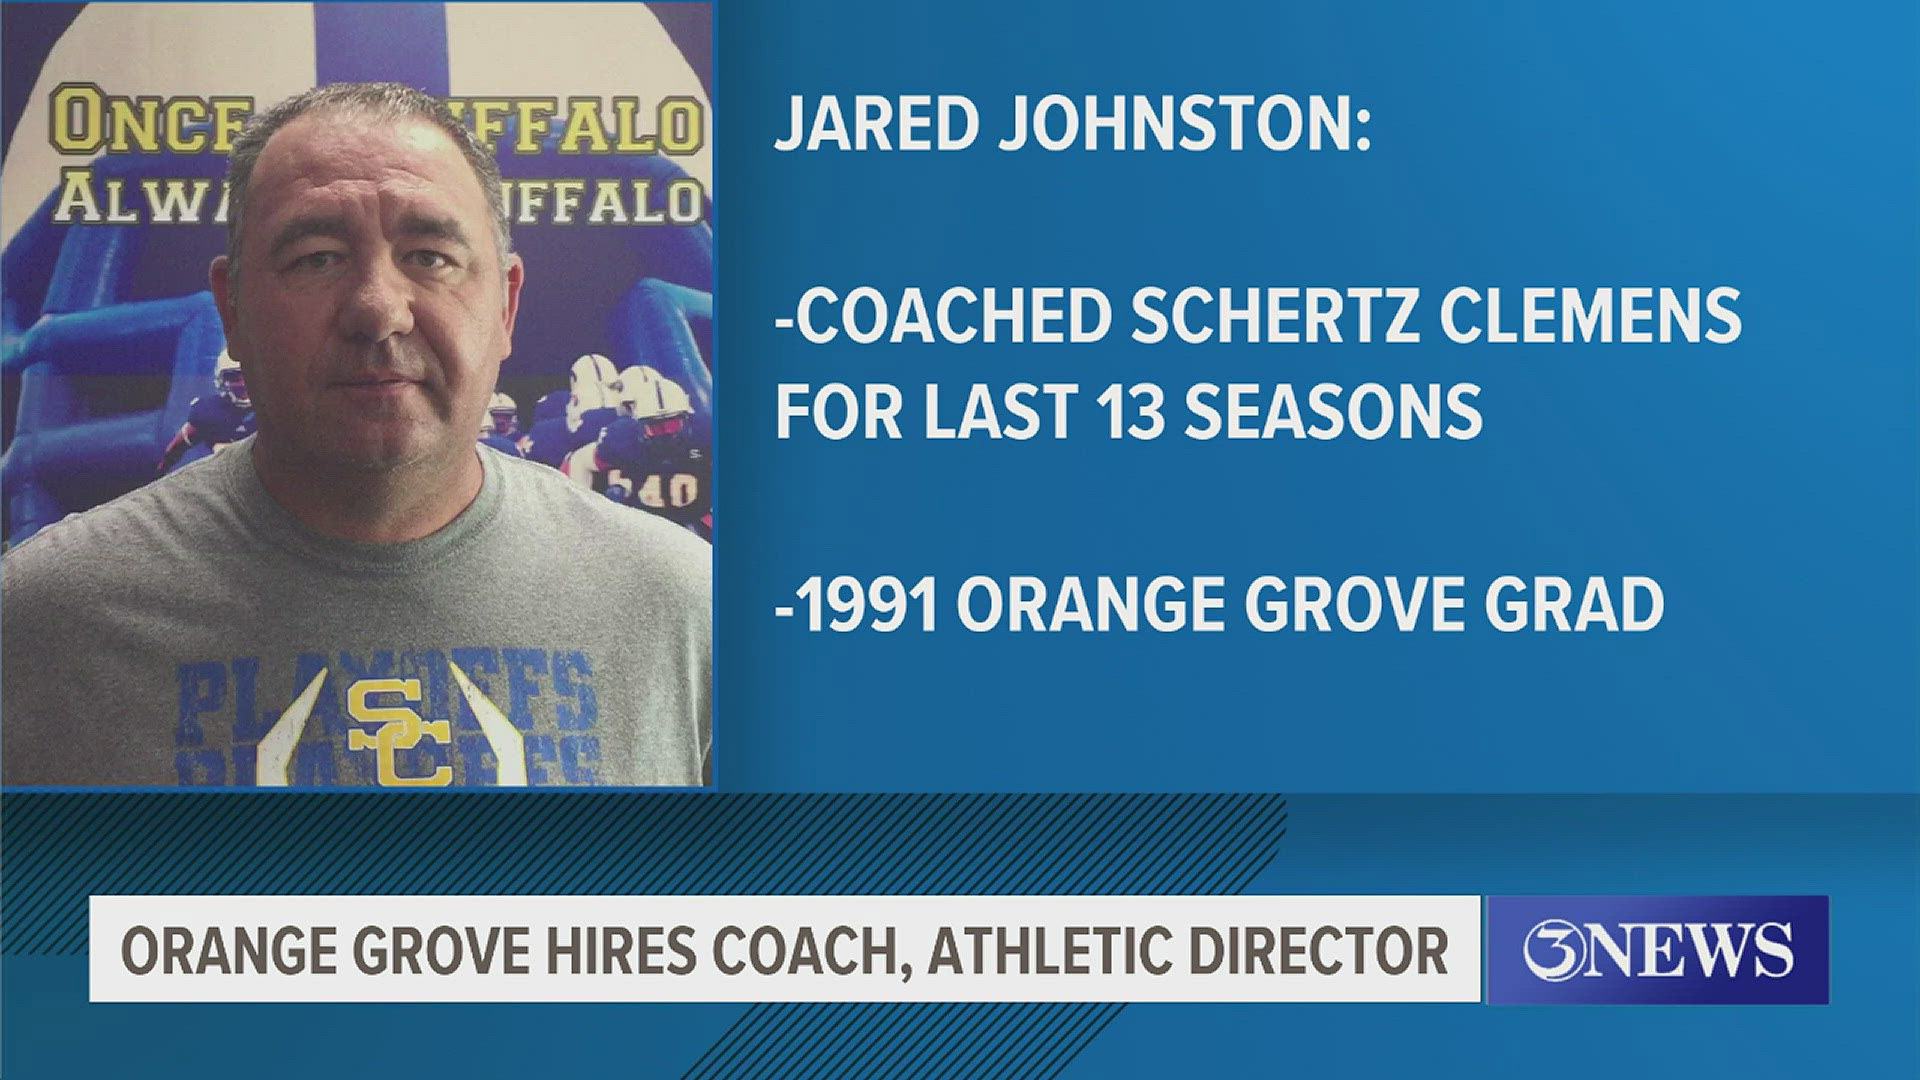 Jared Johnston will be the next coach of the Bulldogs after graduating from Orange Grove back in 1991.